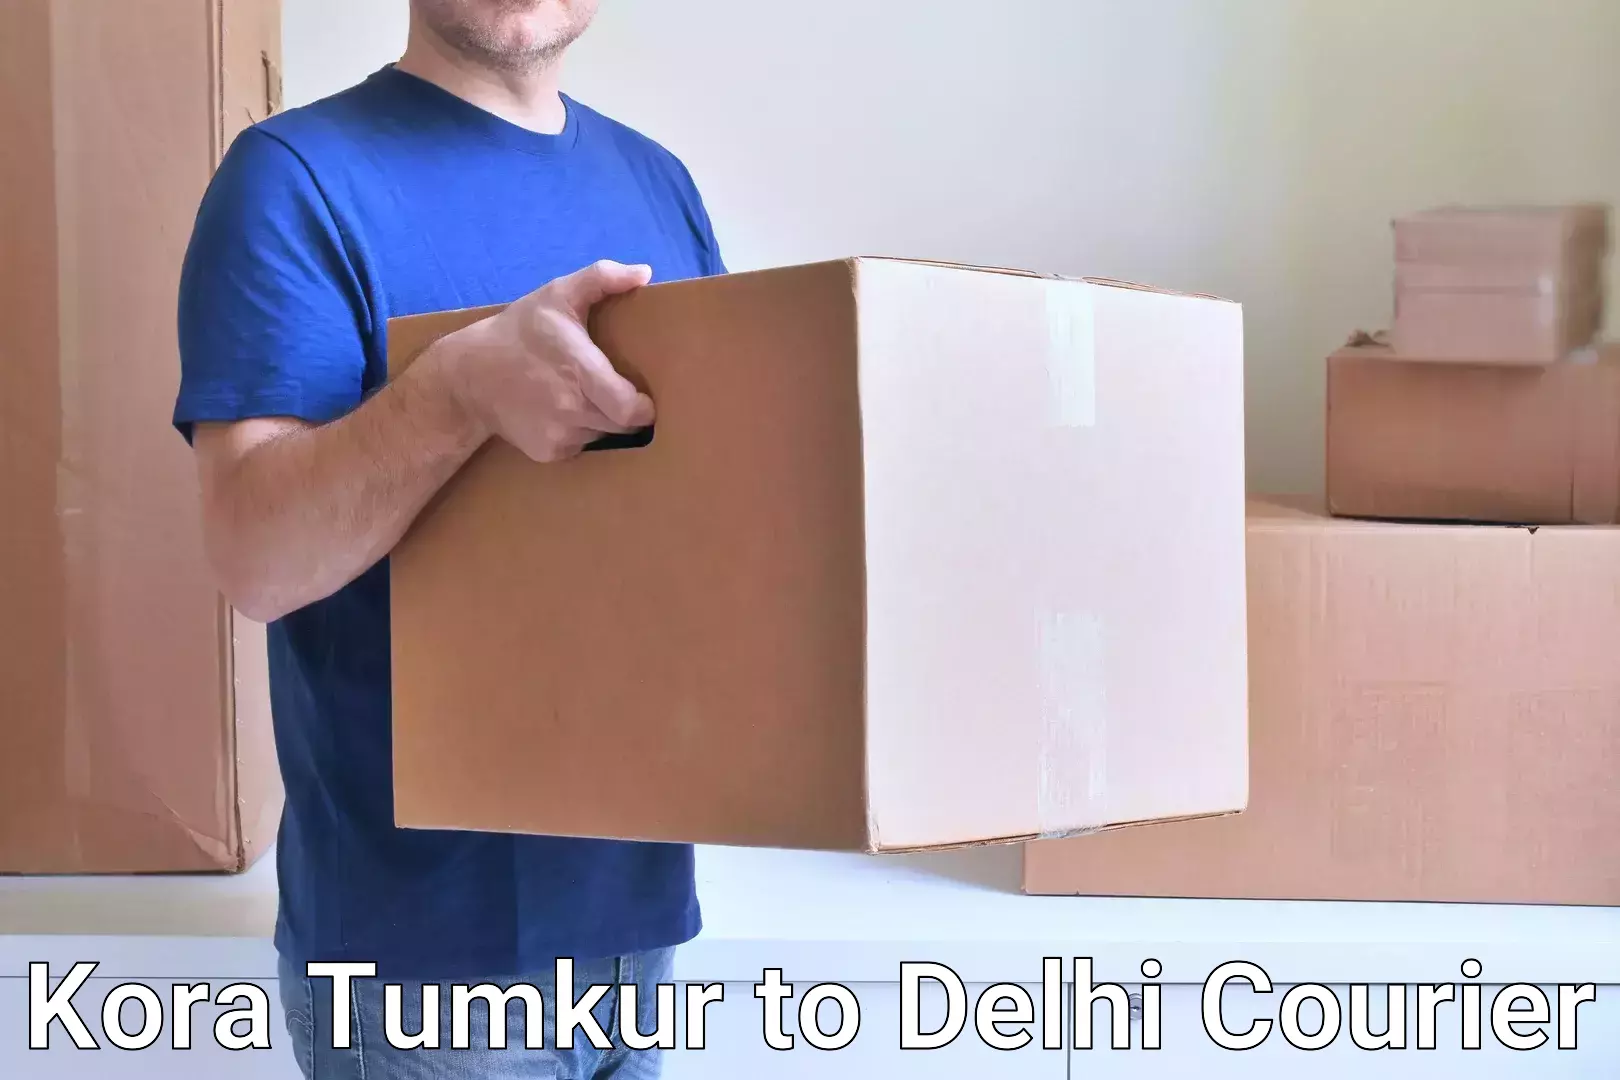 Personal parcel delivery Kora Tumkur to East Delhi